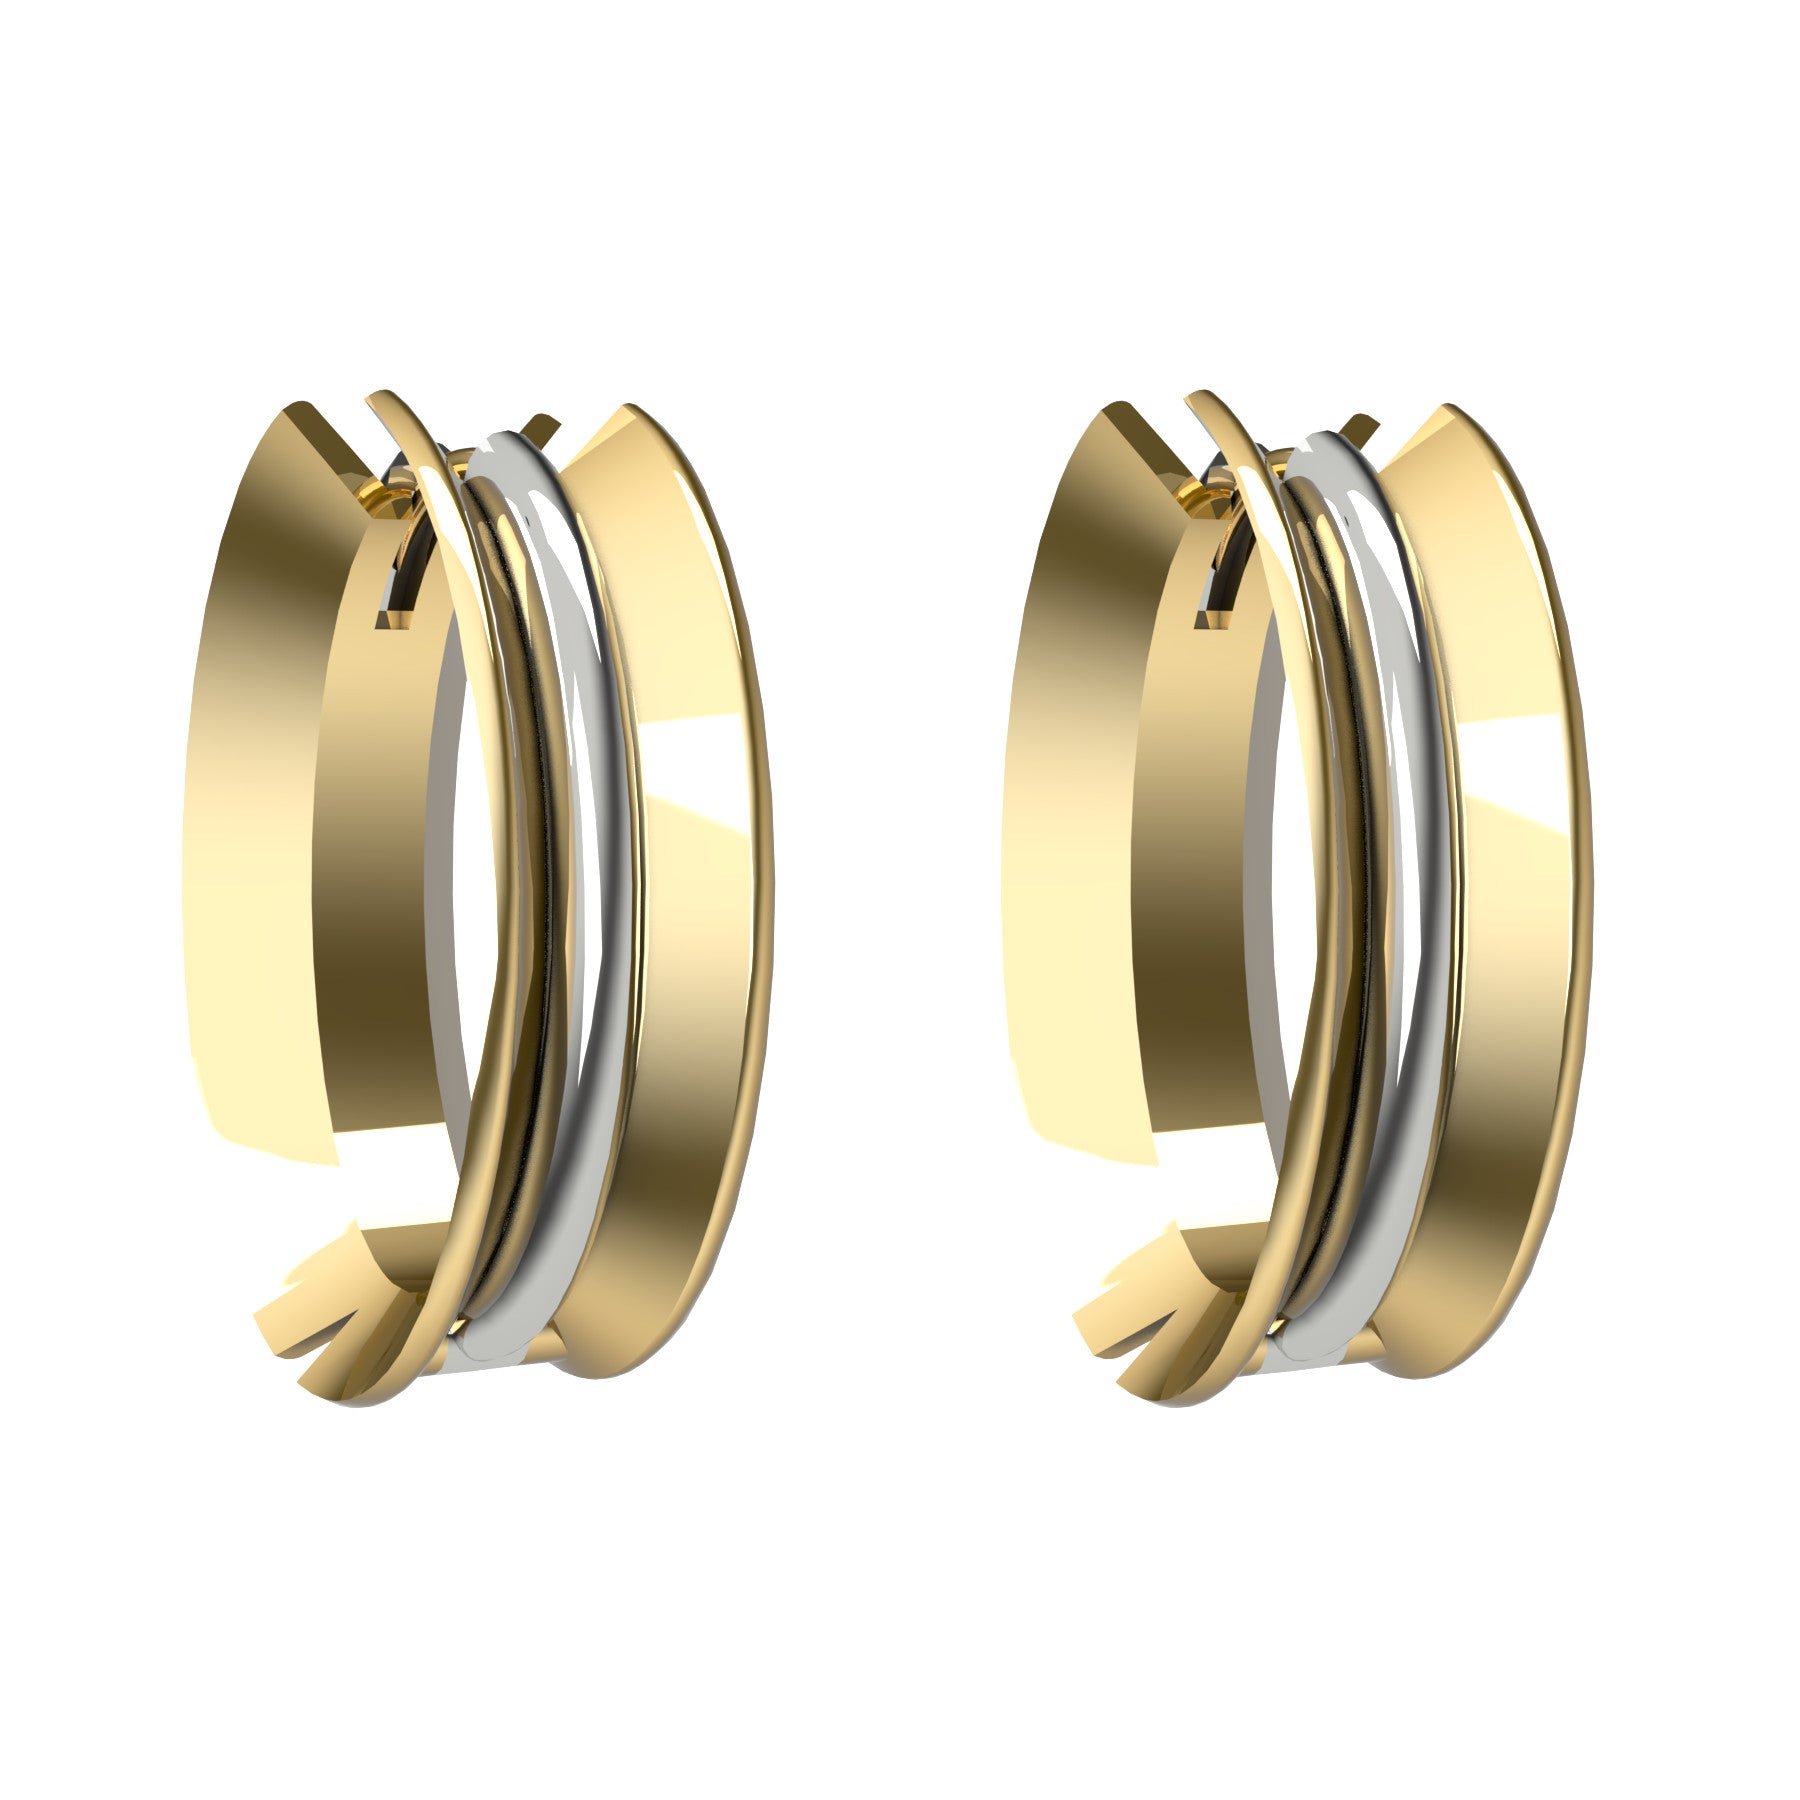 bobo oval earrings, 18 K yellow and white gold, weight about 10,6 g (0.37 oz), size 23,5x13,8x8 mm 